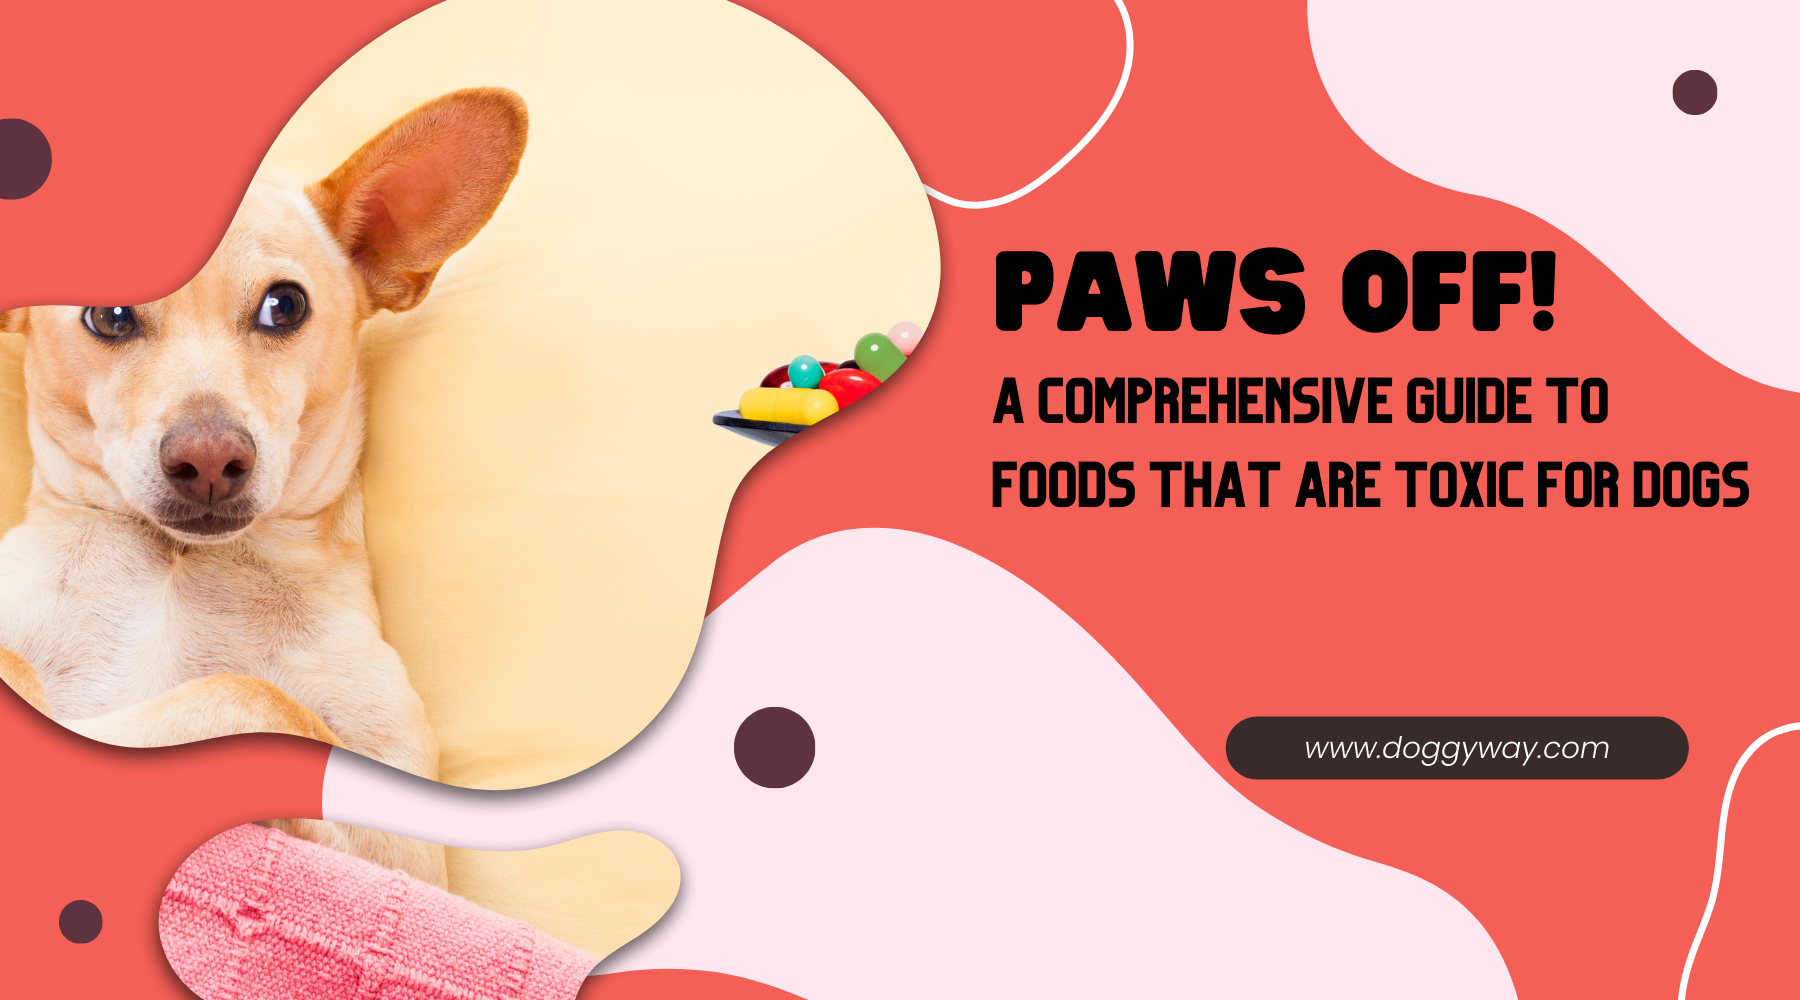 Paws Off! A Comprehensive Guide to Foods That Are Toxic for Dogs